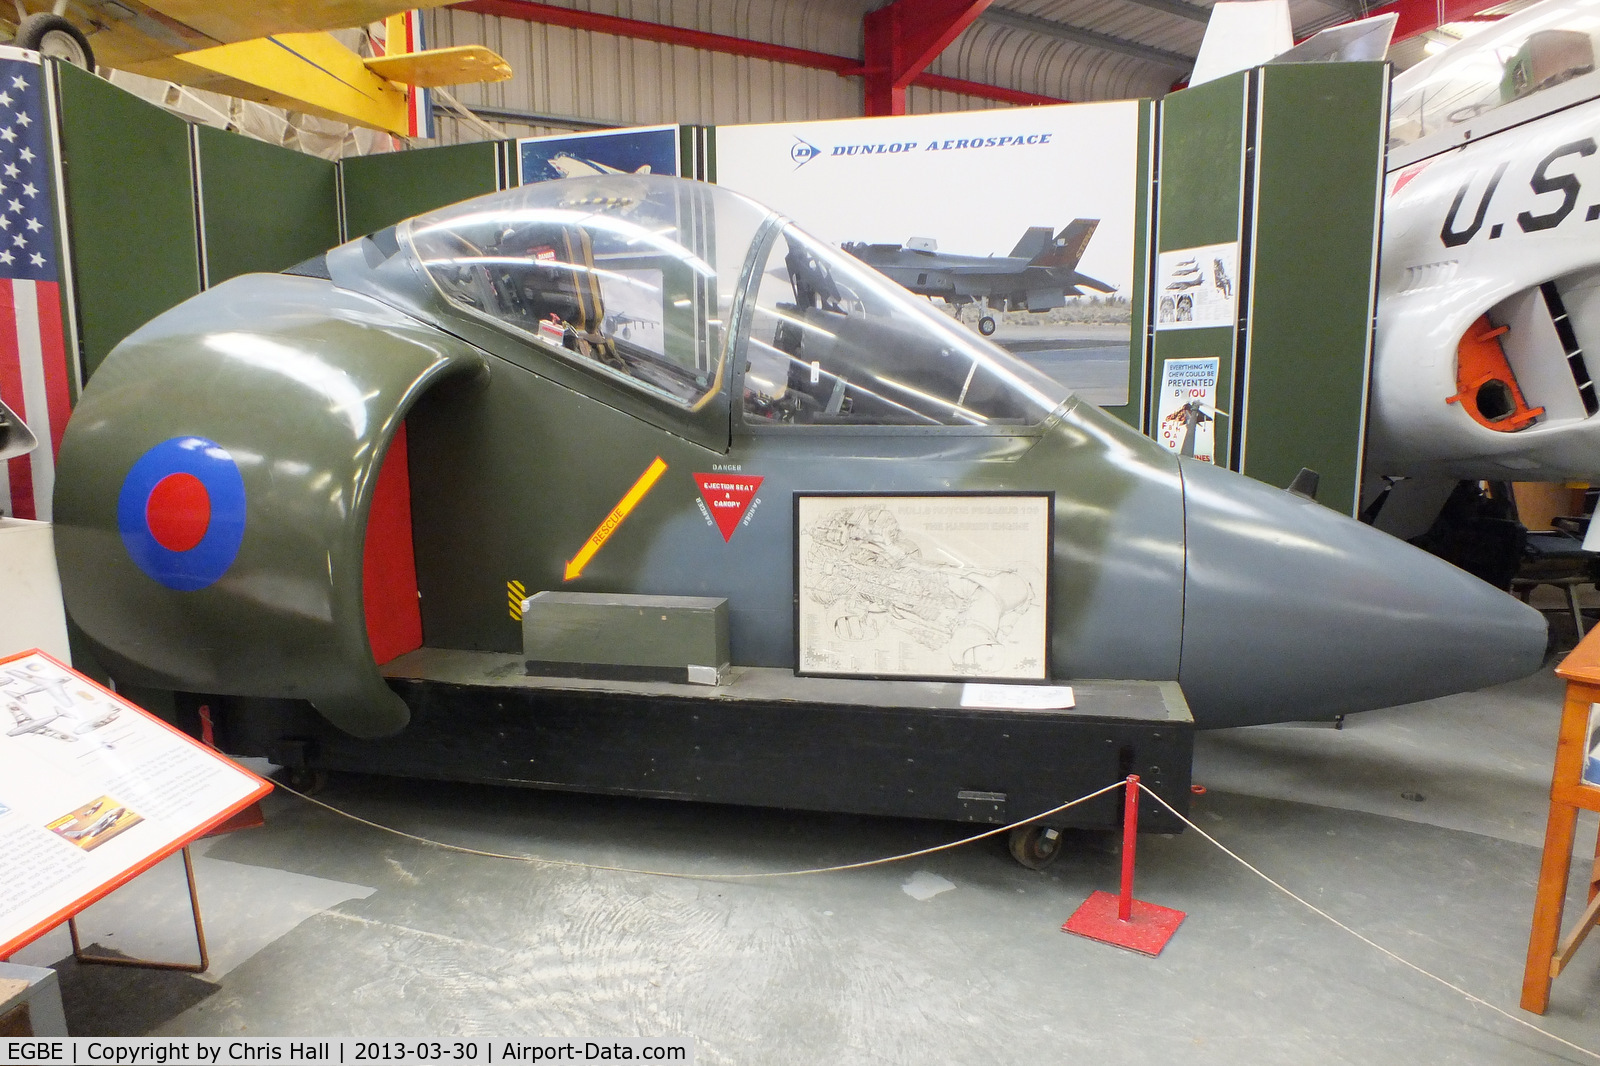 Coventry Airport, Coventry, England United Kingdom (EGBE) - BAe Harrier GR.5 procedures trainer preserved at the Midland Air Museum